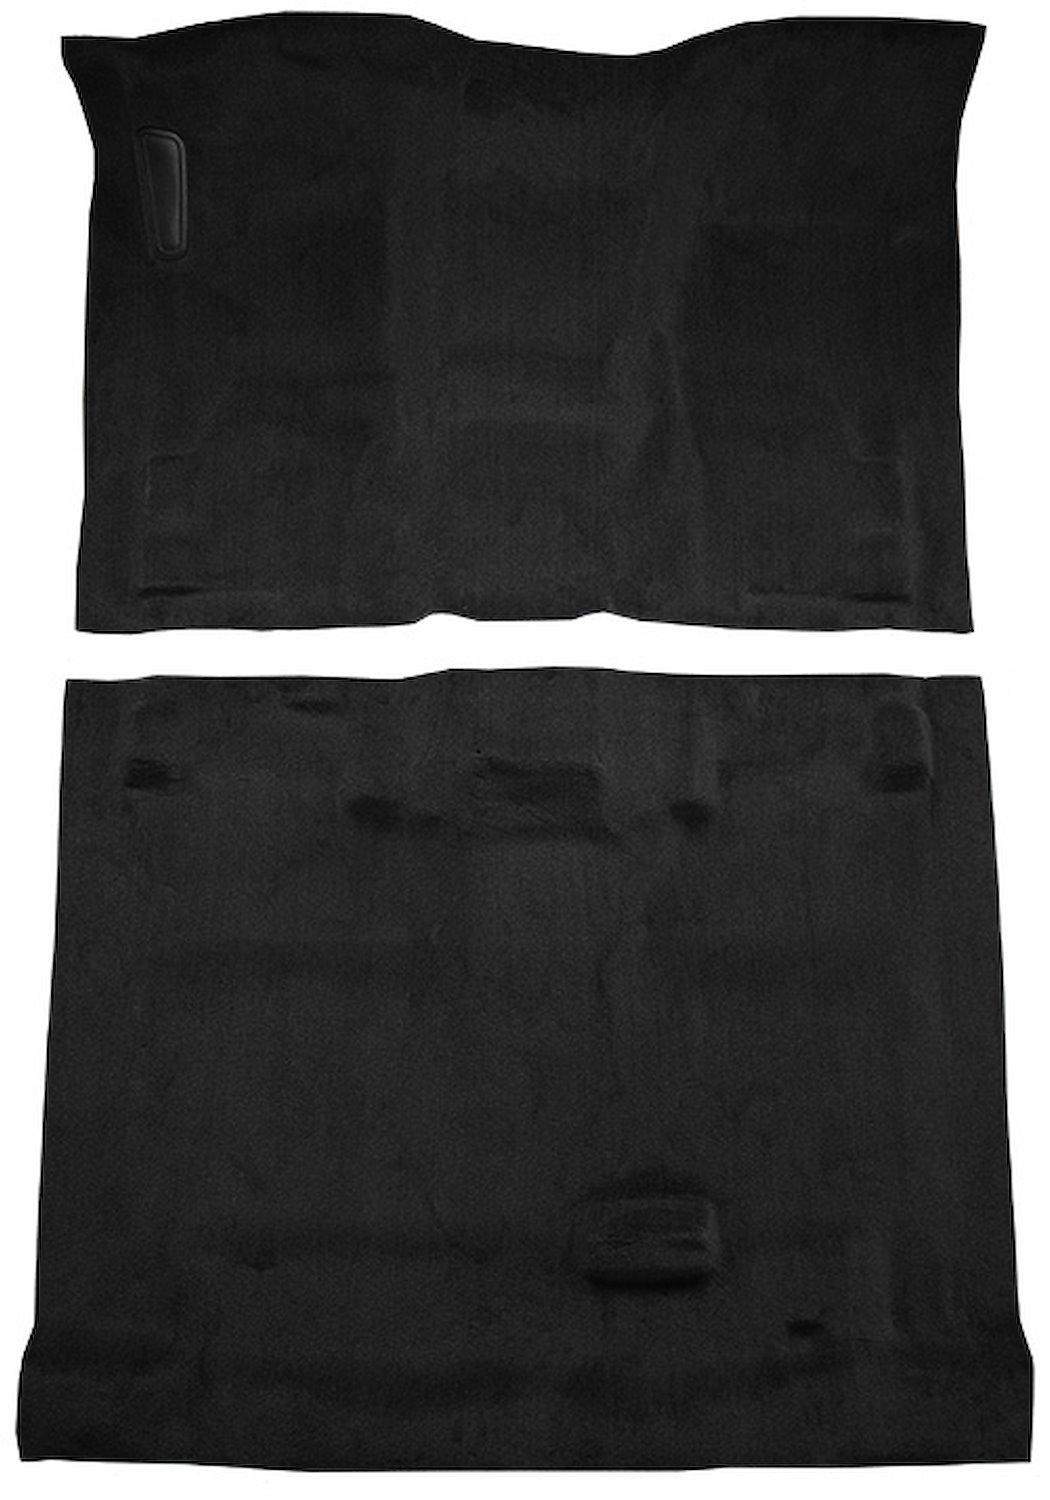 Molded Cut Pile Carpet Fits Select 2014-2018 Chevrolet, GMC Crew Cab Truck Models [OE-Style Jute Backing, 2-Piece, Black]